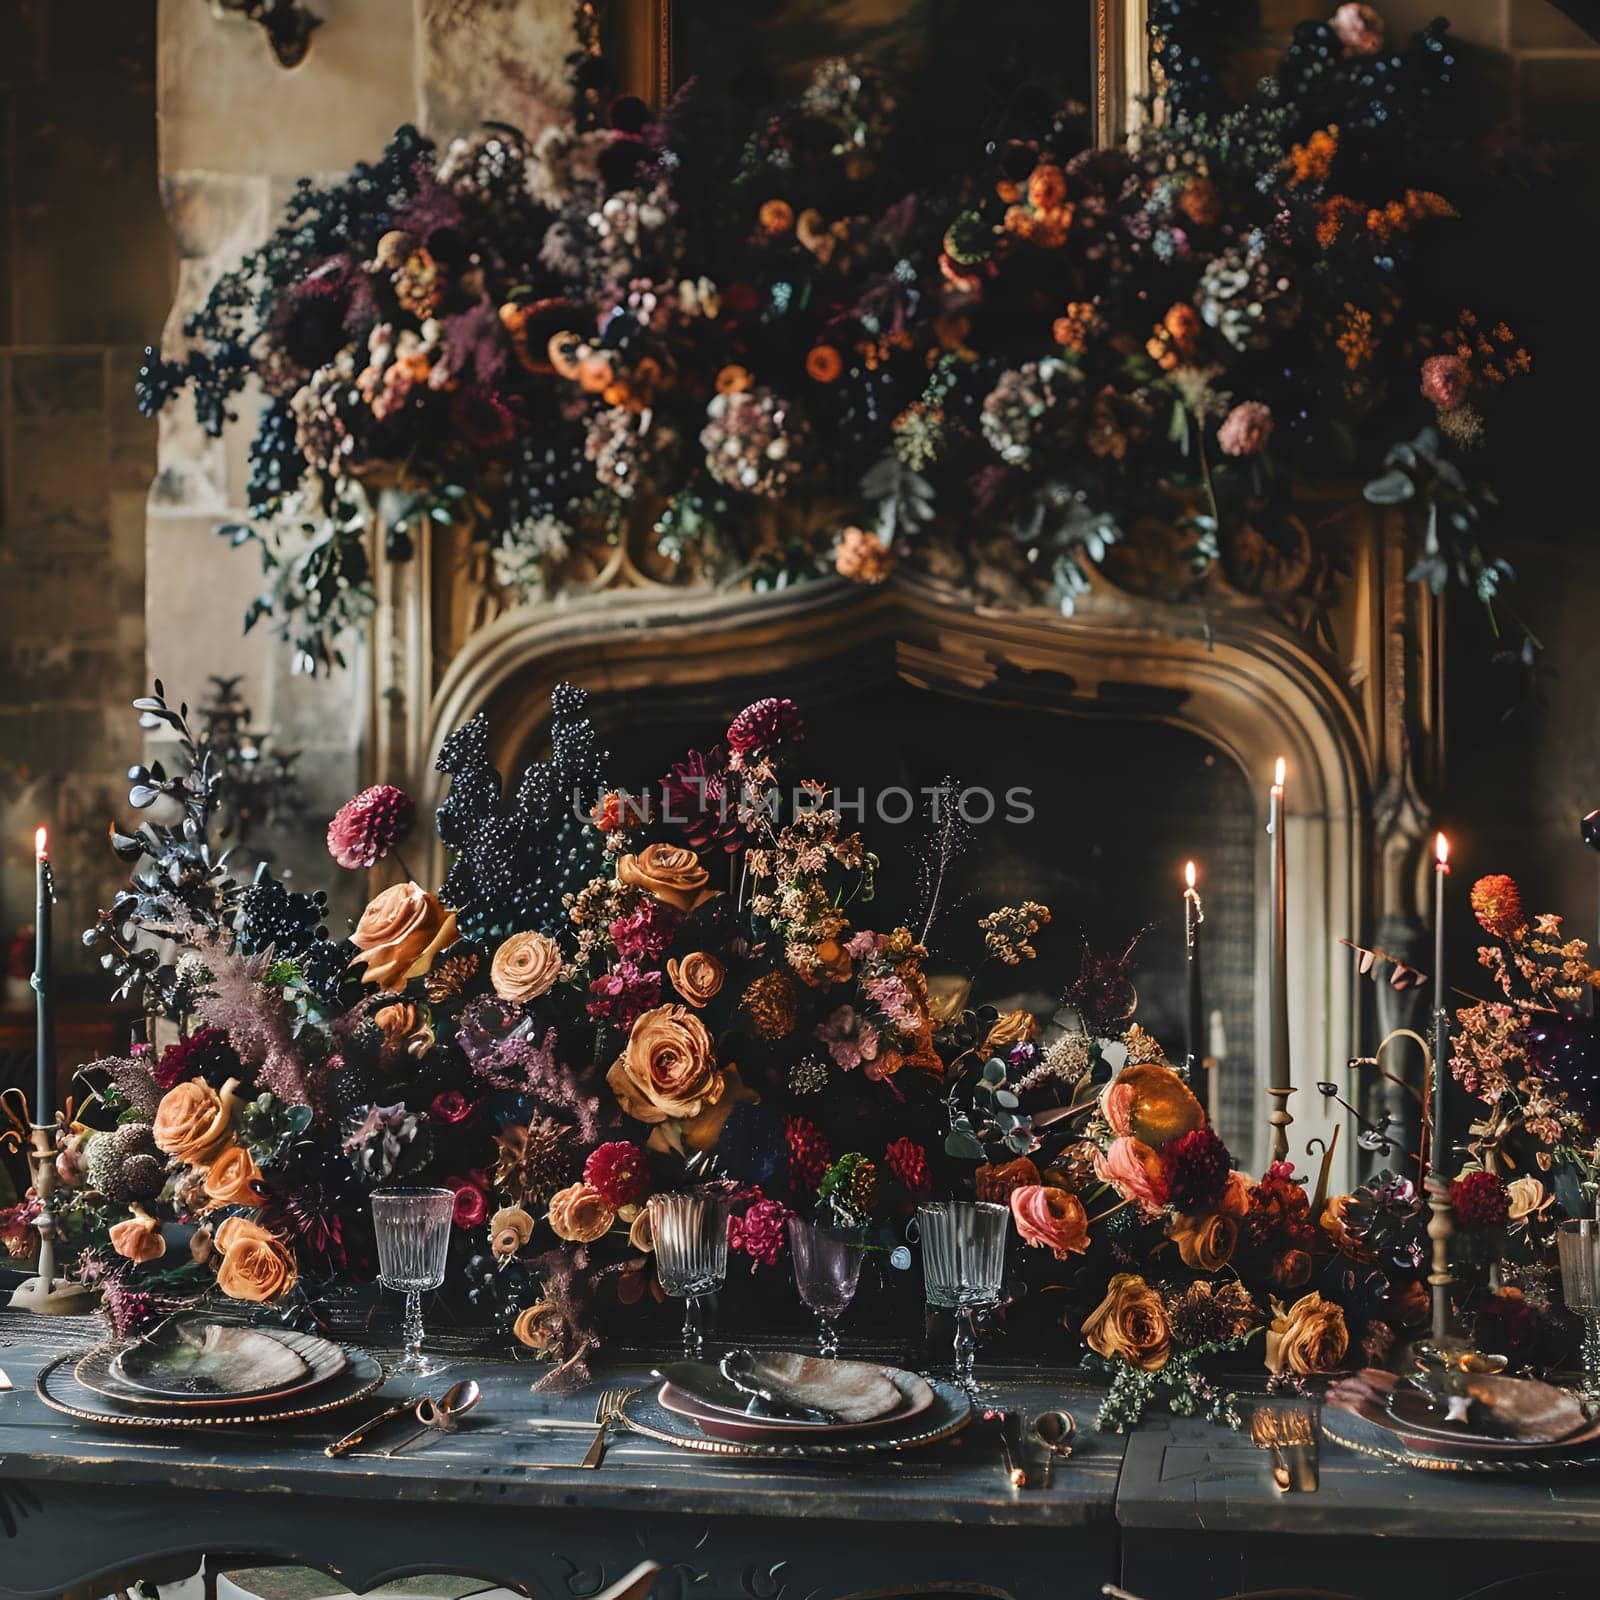 A creative arts event featuring flower arranging with roses and other flowers as ornaments. Christmas decorations, candles, plates in front of a fireplace